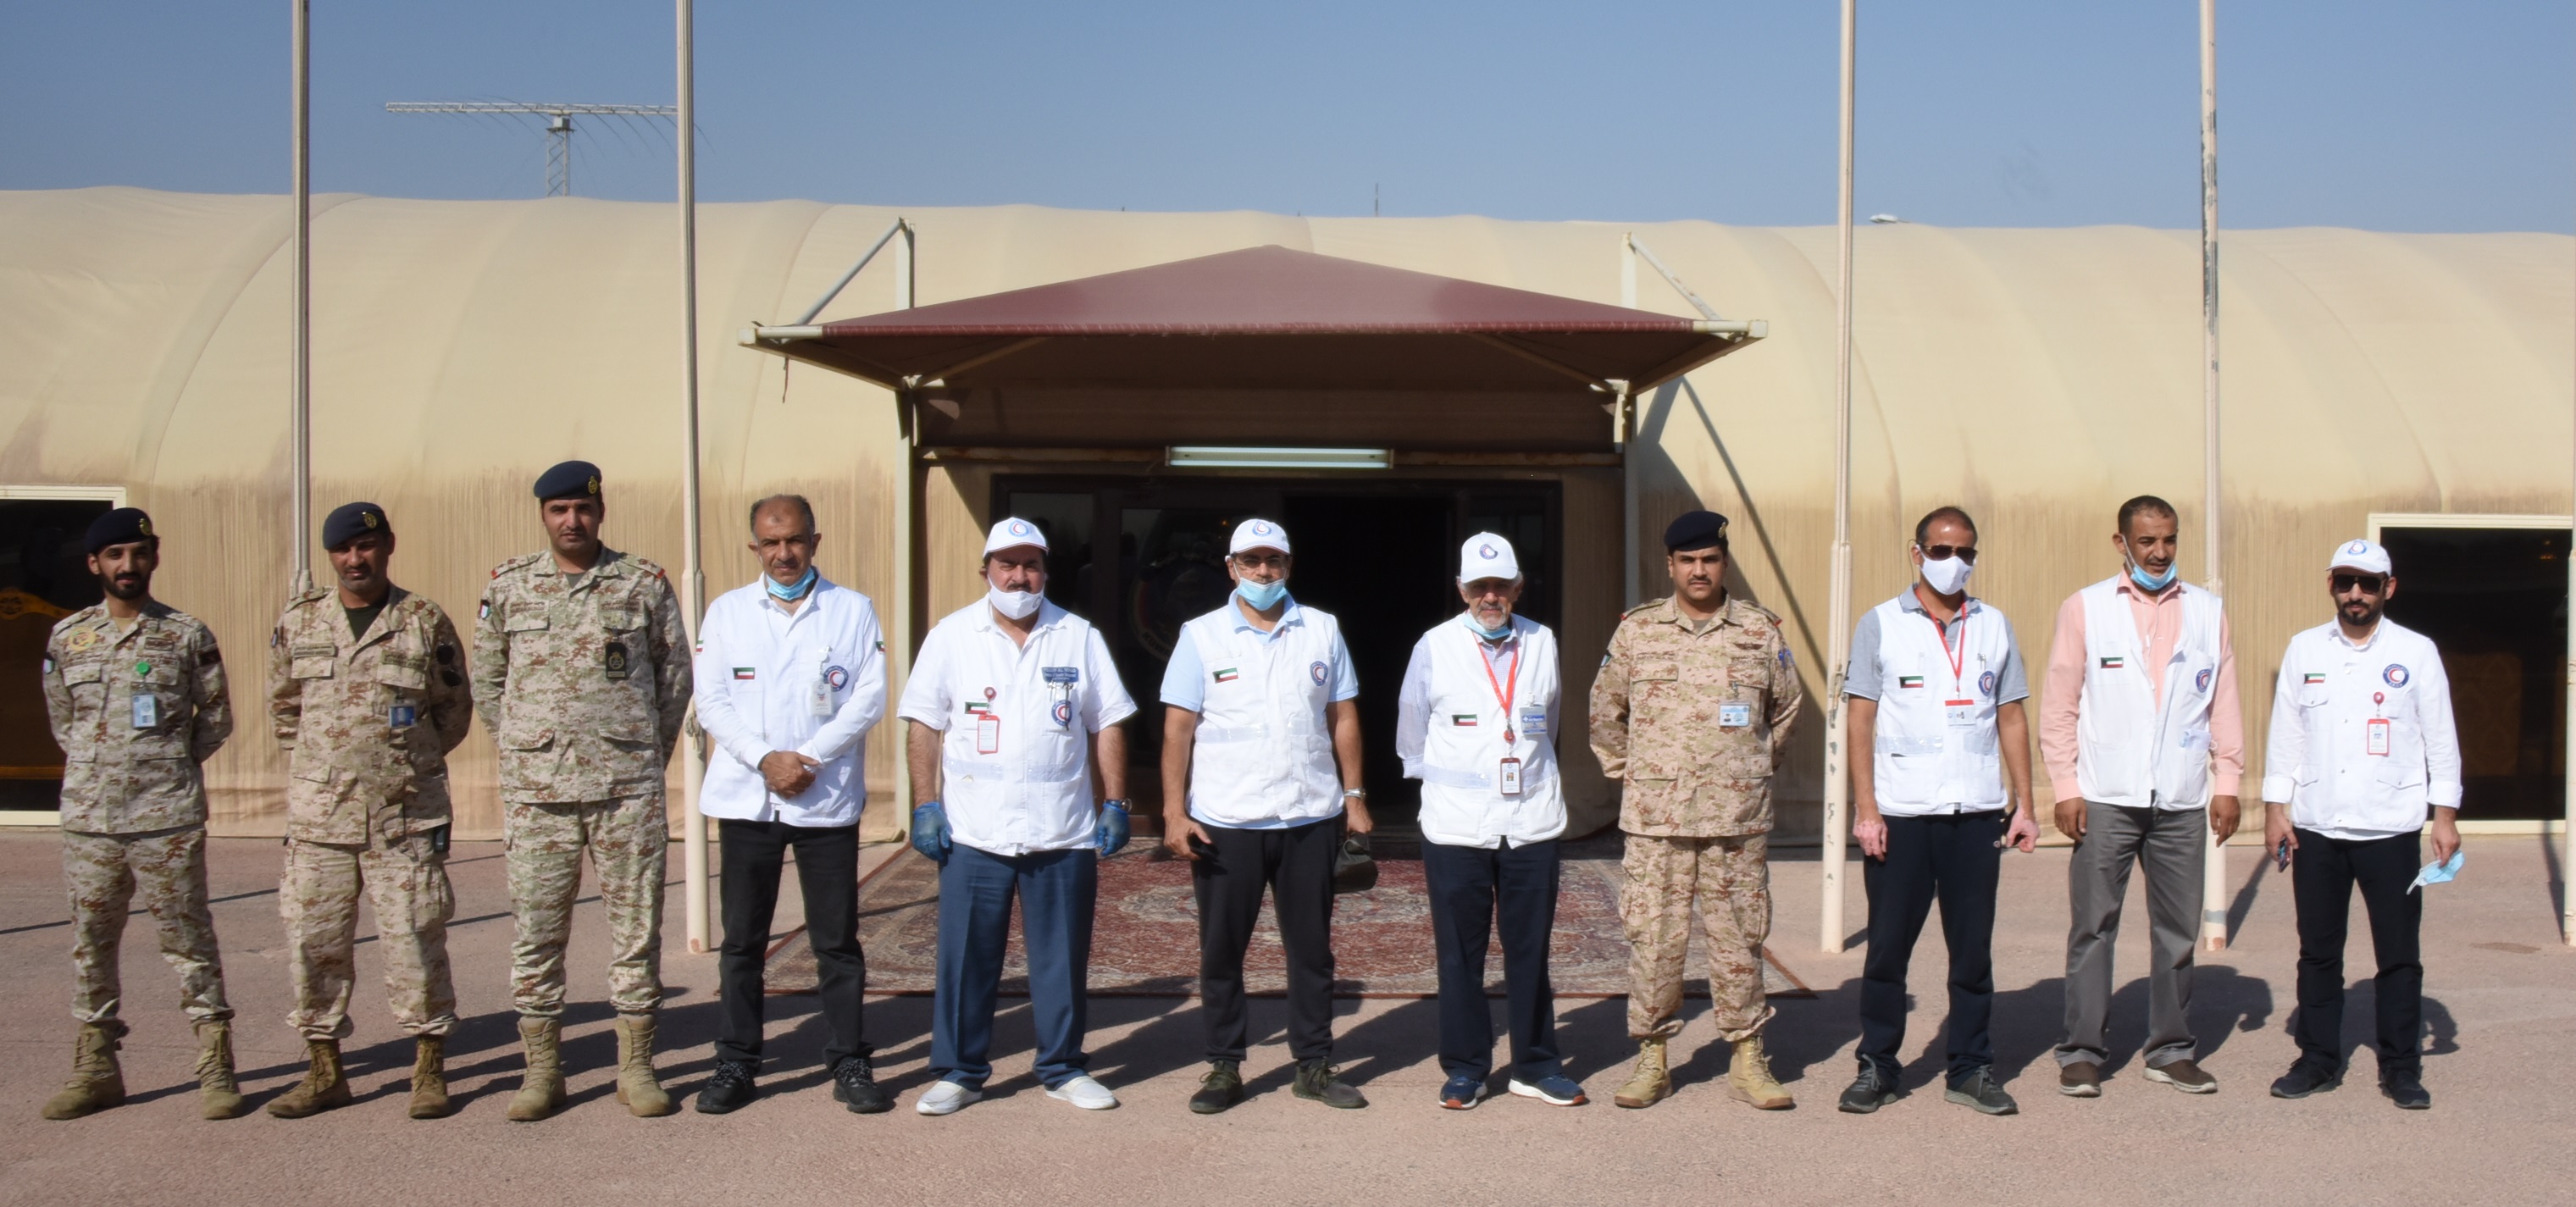 Kuwait's KRCS sends medical, relief aid plane to Lebanon